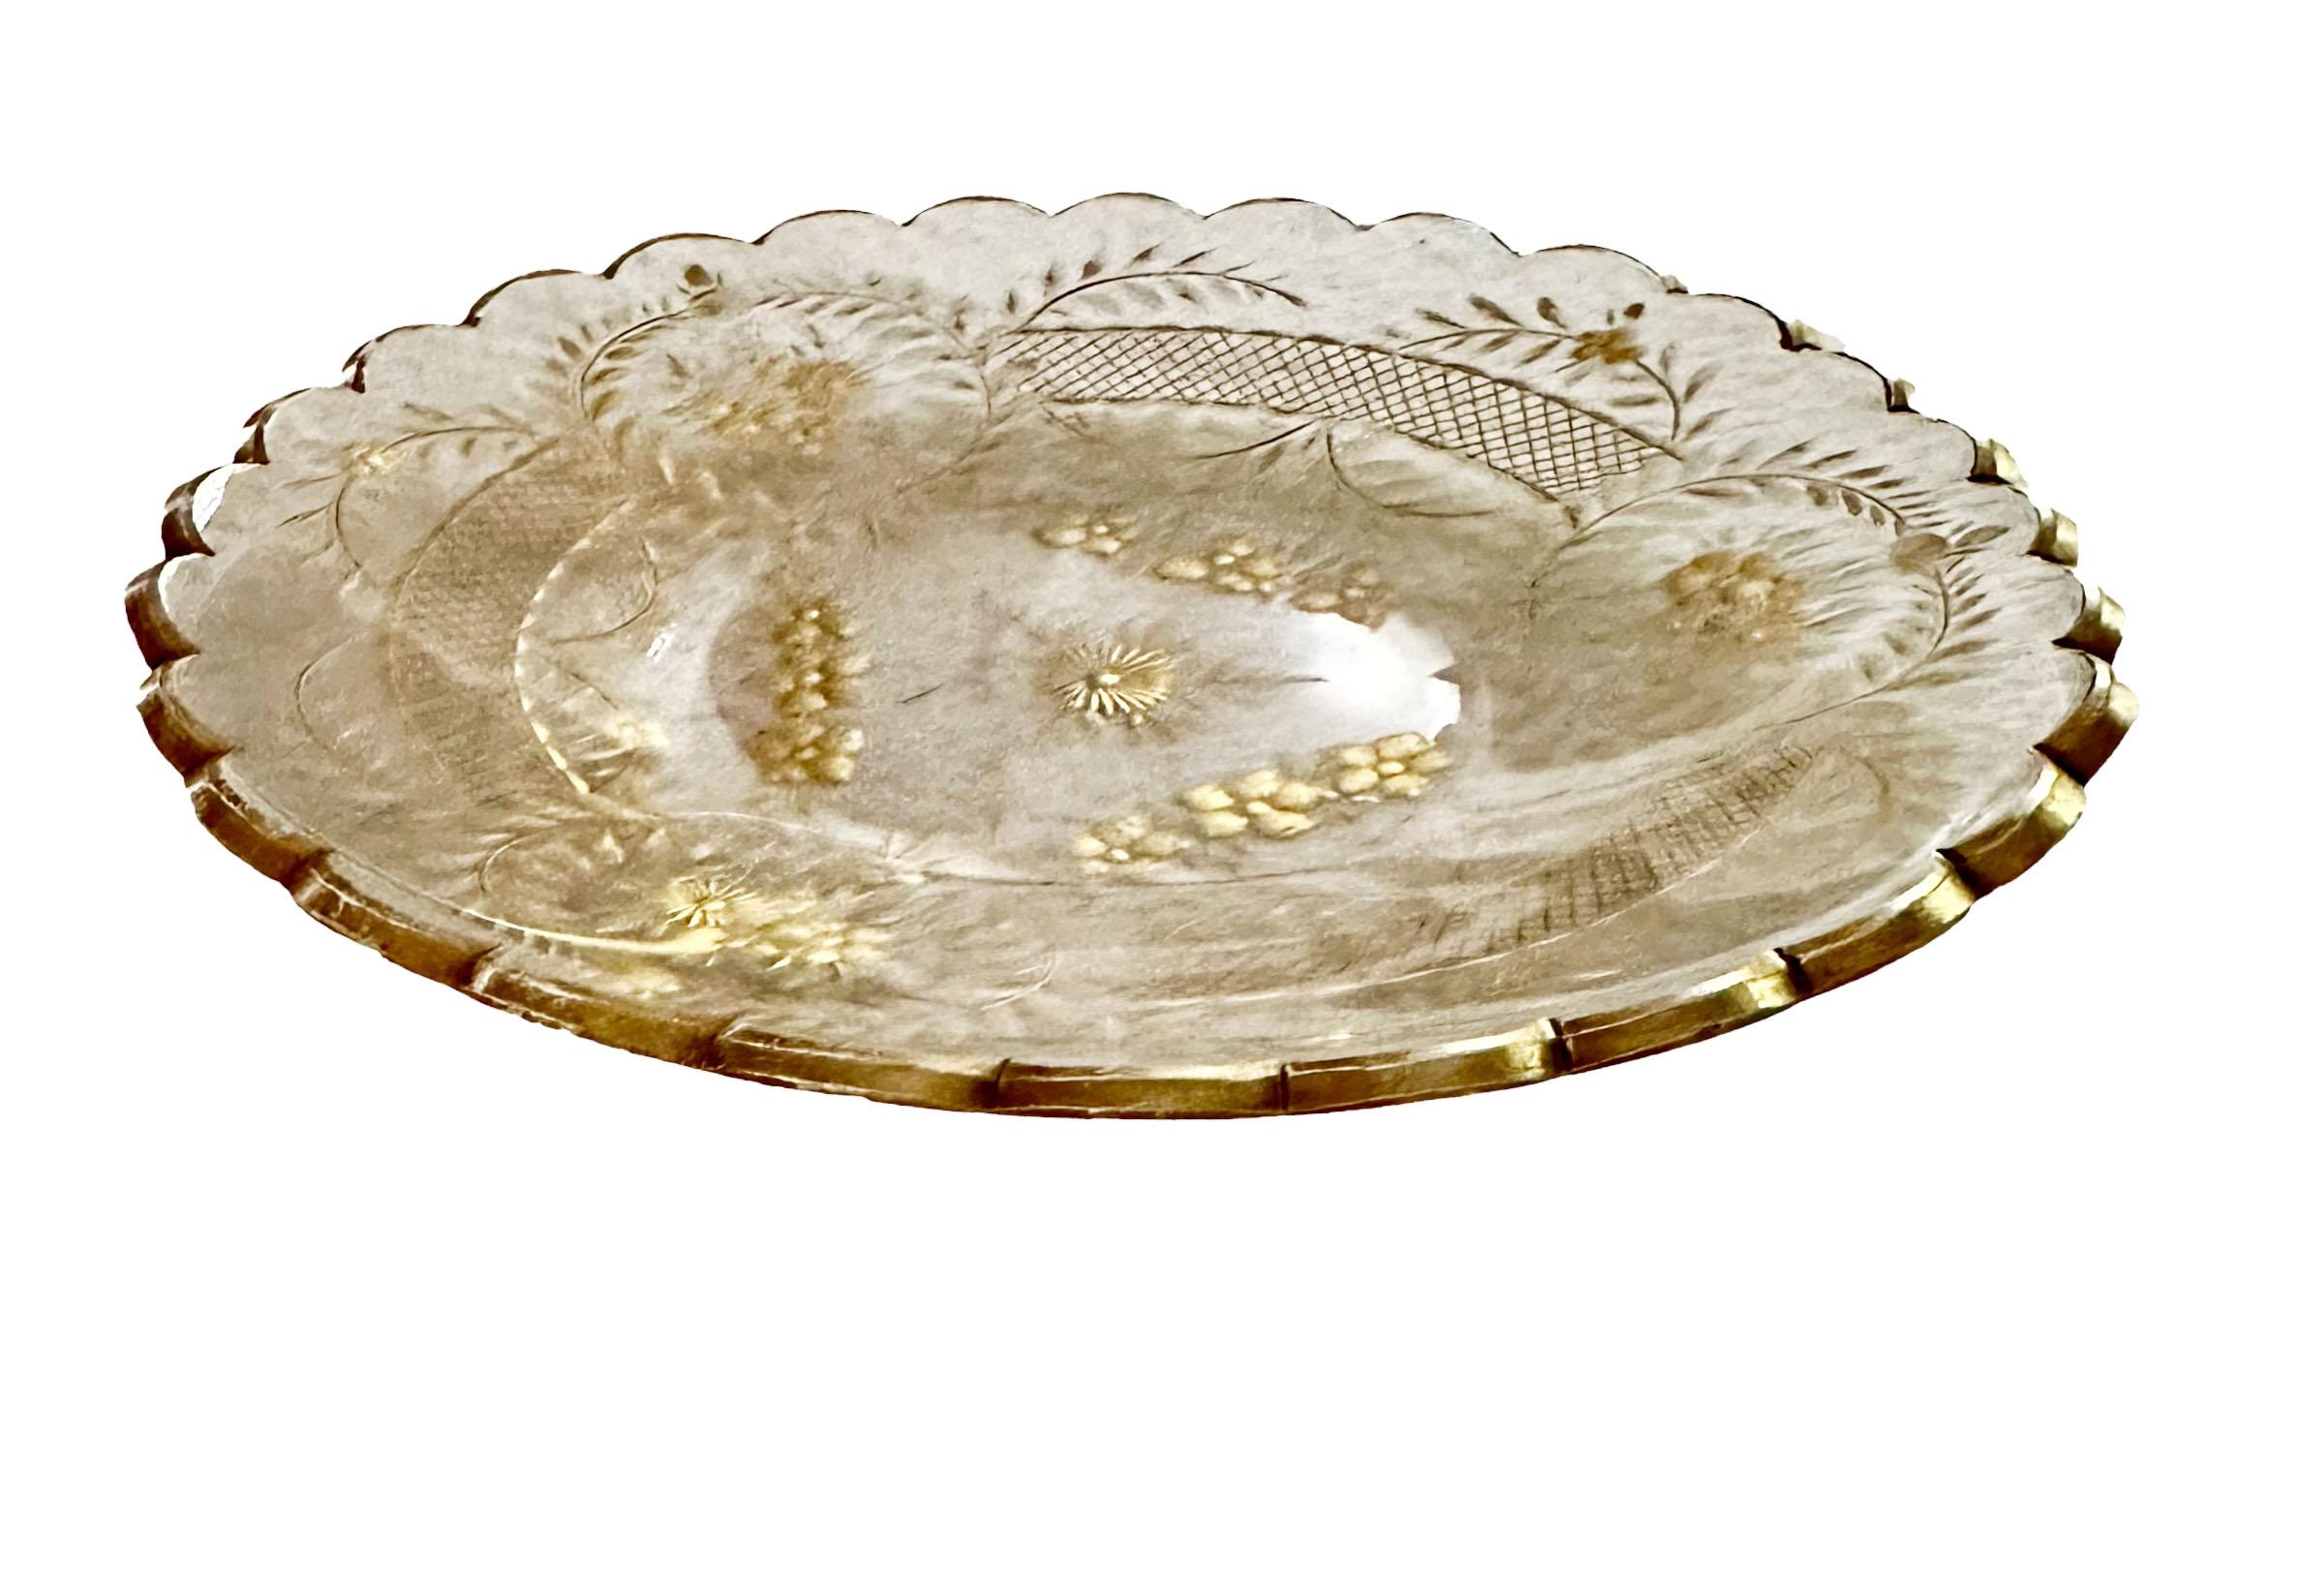 A beautiful French Baccarat style plate with gold florals and scalloped edge. Circa 1915, France. 